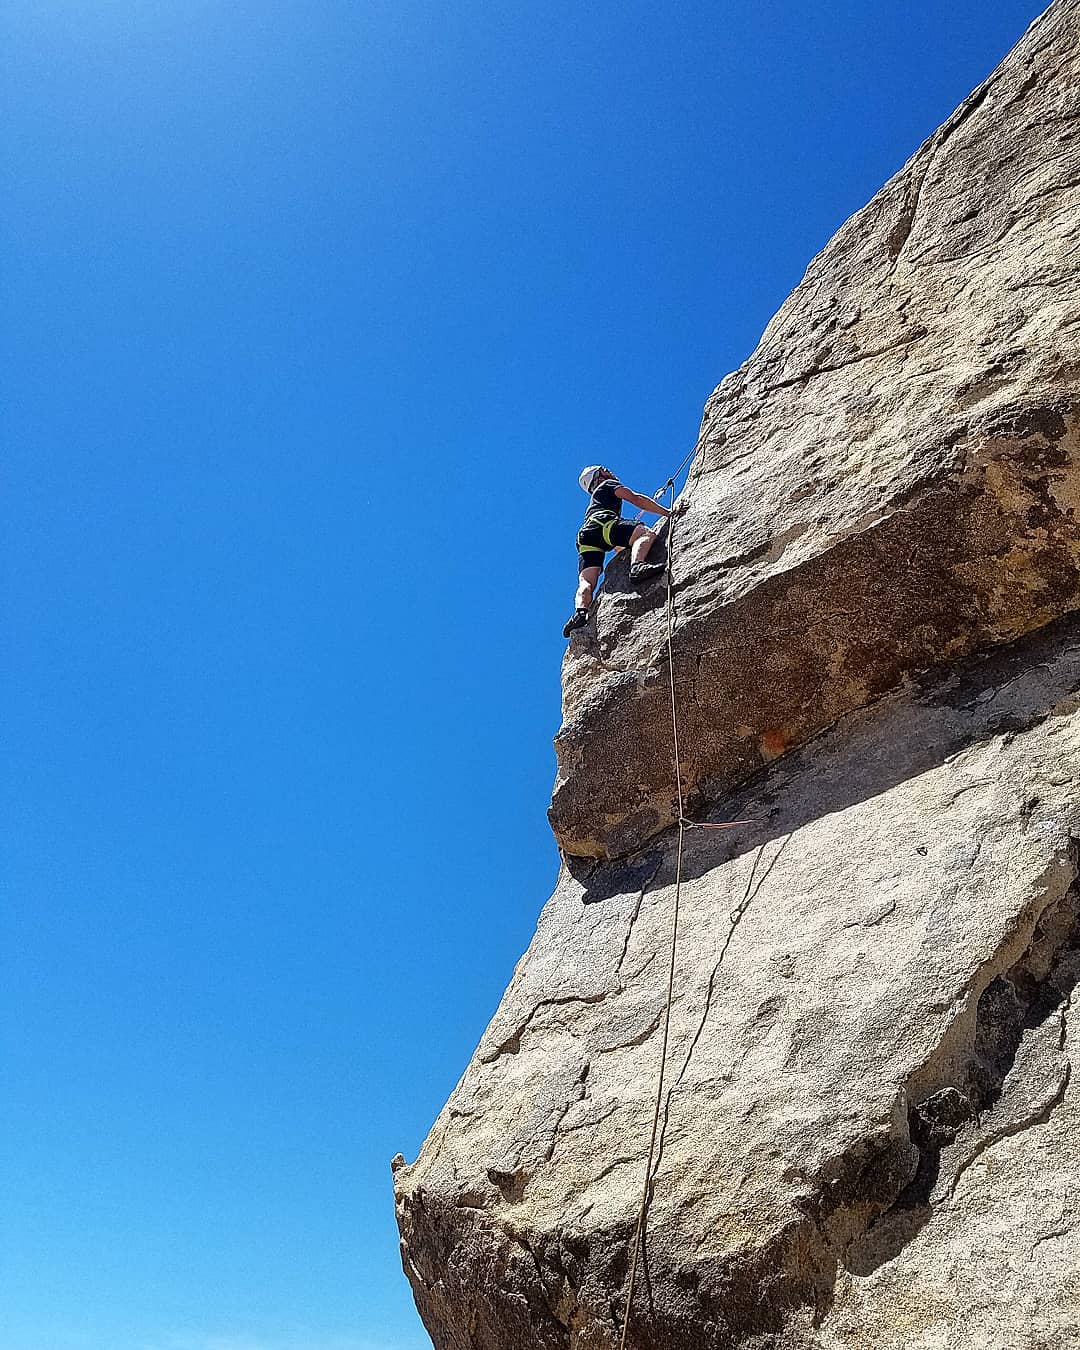 Climbing into to clear blue sky on the "Headstone" formation in Joshua Tree.The "SouthWest Corner, 5.6" might be one of the most photographed rocks/climbs in the park. A striking exposed line starts with a traverse directly to the arête of the SW corner....#chillinorockclimbing #rockclimbing #climbing_pictures_of_instagram #guide #guiding #climbing #optoutside #joshuatree #neverstopexploring...@nilsr_13 @joshuatreenps @thecosmicclimber